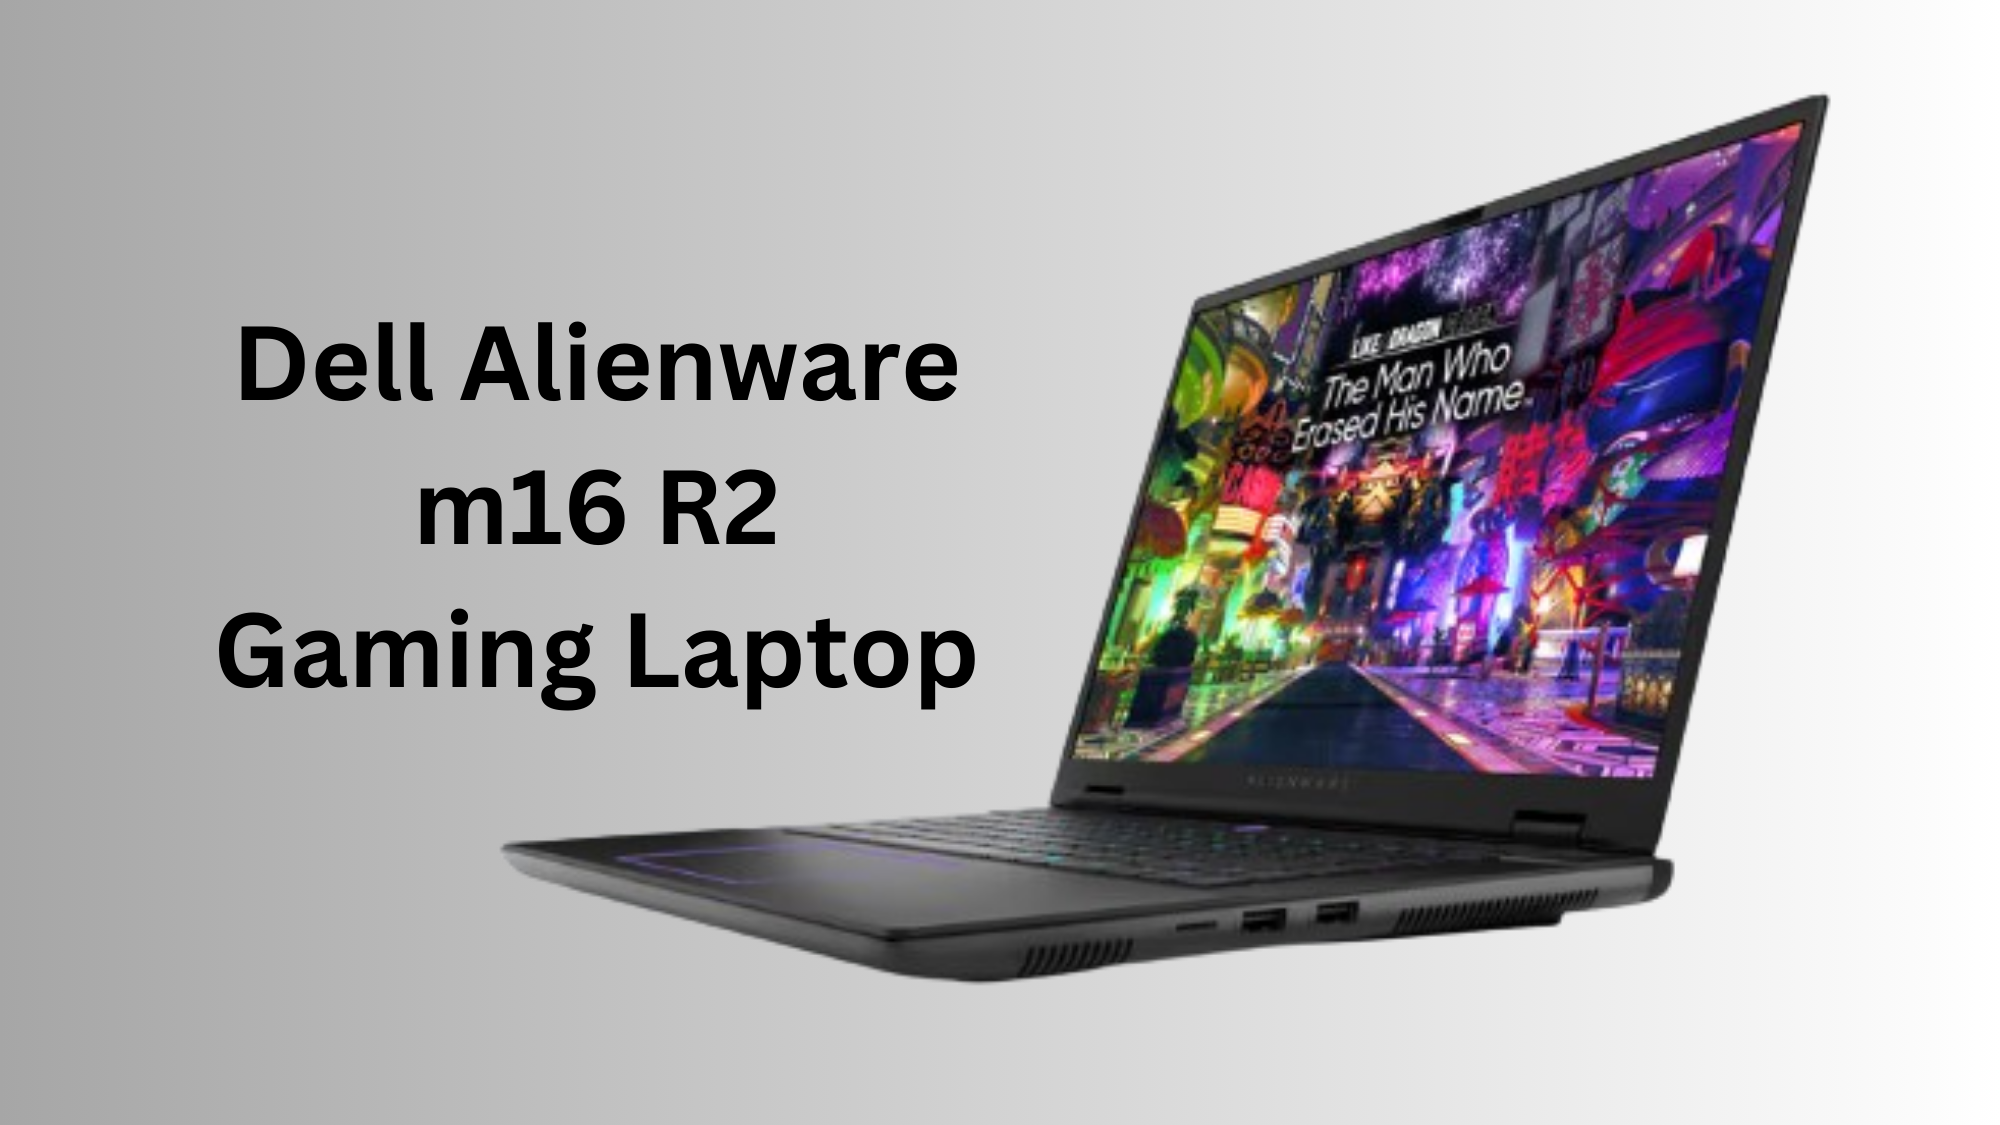 Dell Alienware m16 r2 gaming laptop